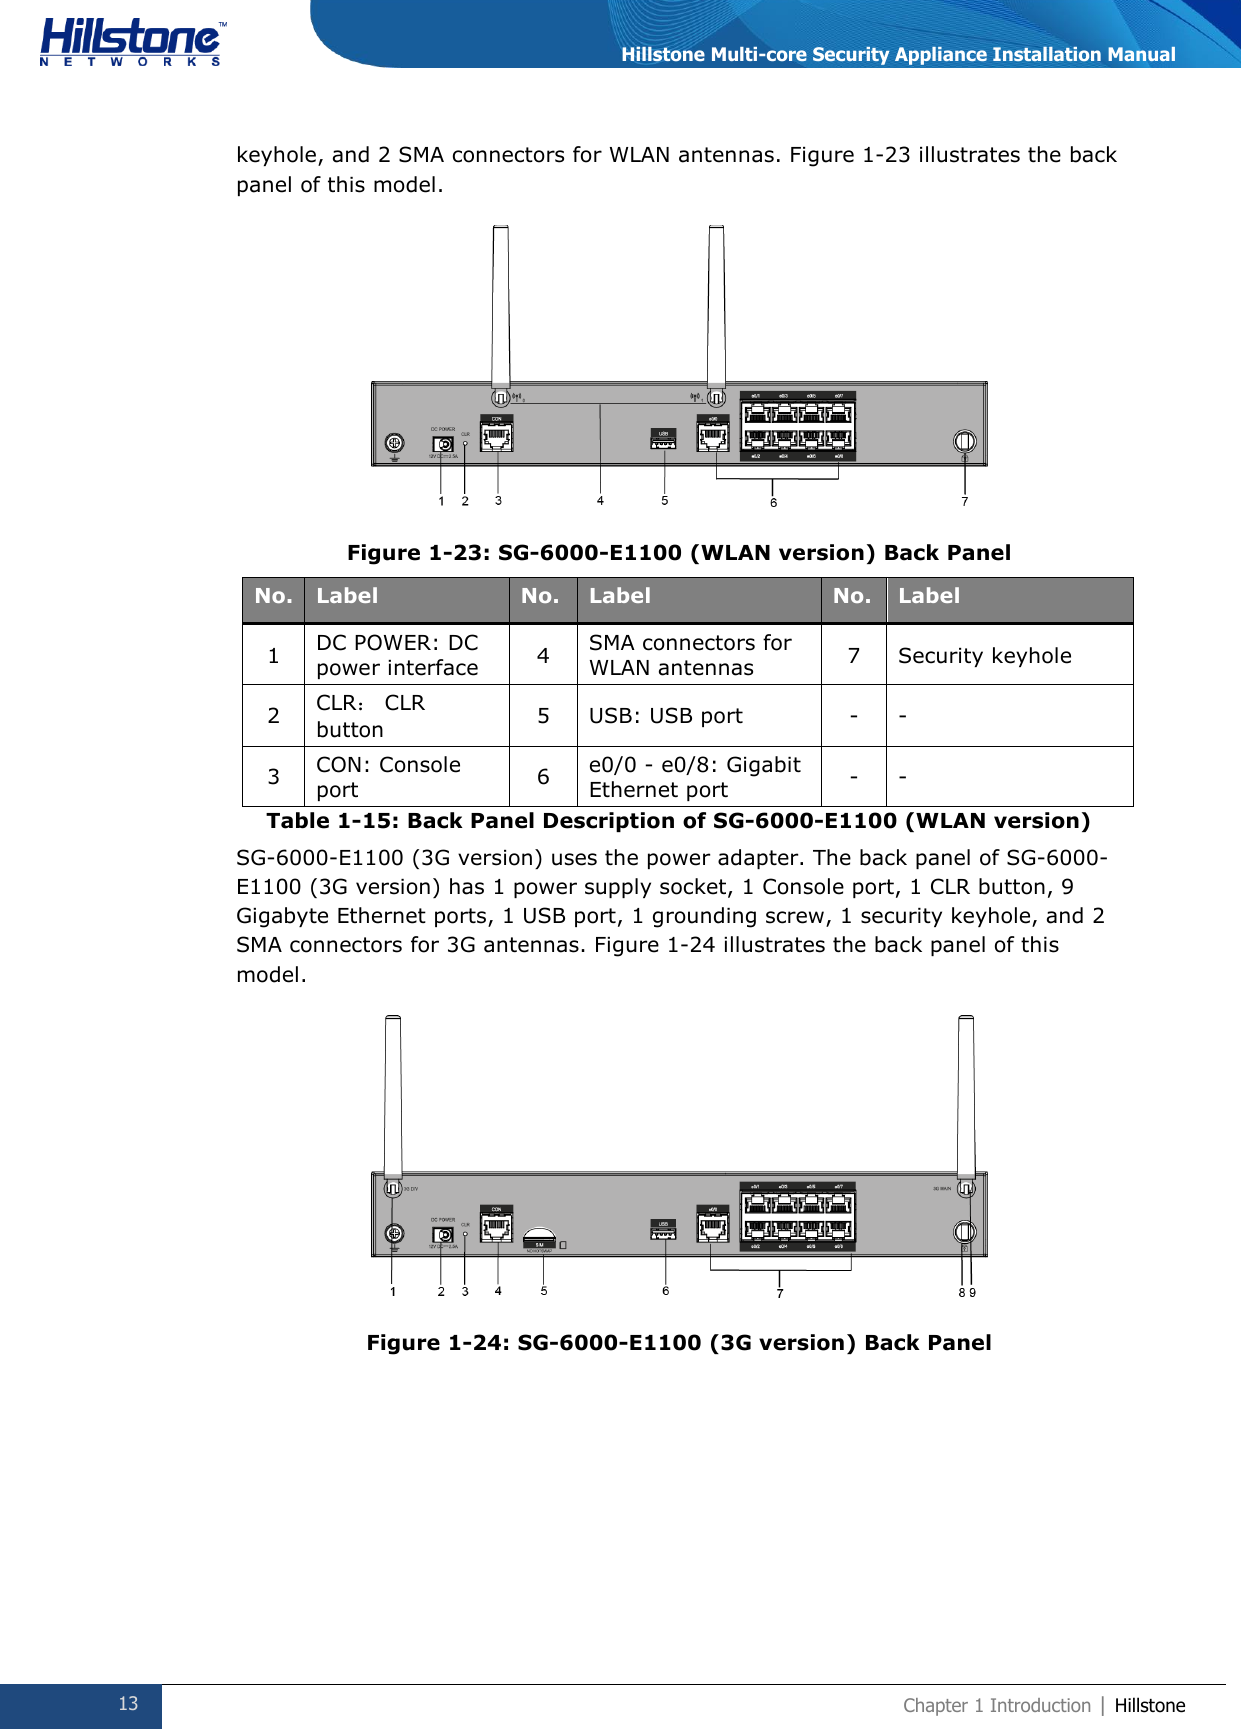  13 Chapter 1 Introduction | Hillstone  Hillstone Multi-core Security Appliance Installation Manual keyhole, and 2 SMA connectors for WLAN antennas. Figure 1-23 illustrates the back panel of this model.  Figure 1-23: SG-6000-E1100 (WLAN version) Back Panel No. Label No. Label No. Label 1 DC POWER: DC power interface  4 SMA connectors for WLAN antennas 7 Security keyhole 2 CLR： CLR button 5 USB: USB port - - 3 CON: Console port 6 e0/0 - e0/8: Gigabit Ethernet port  - - Table 1-15: Back Panel Description of SG-6000-E1100 (WLAN version) SG-6000-E1100 (3G version) uses the power adapter. The back panel of SG-6000-E1100 (3G version) has 1 power supply socket, 1 Console port, 1 CLR button, 9 Gigabyte Ethernet ports, 1 USB port, 1 grounding screw, 1 security keyhole, and 2 SMA connectors for 3G antennas. Figure 1-24 illustrates the back panel of this model.  Figure 1-24: SG-6000-E1100 (3G version) Back Panel 